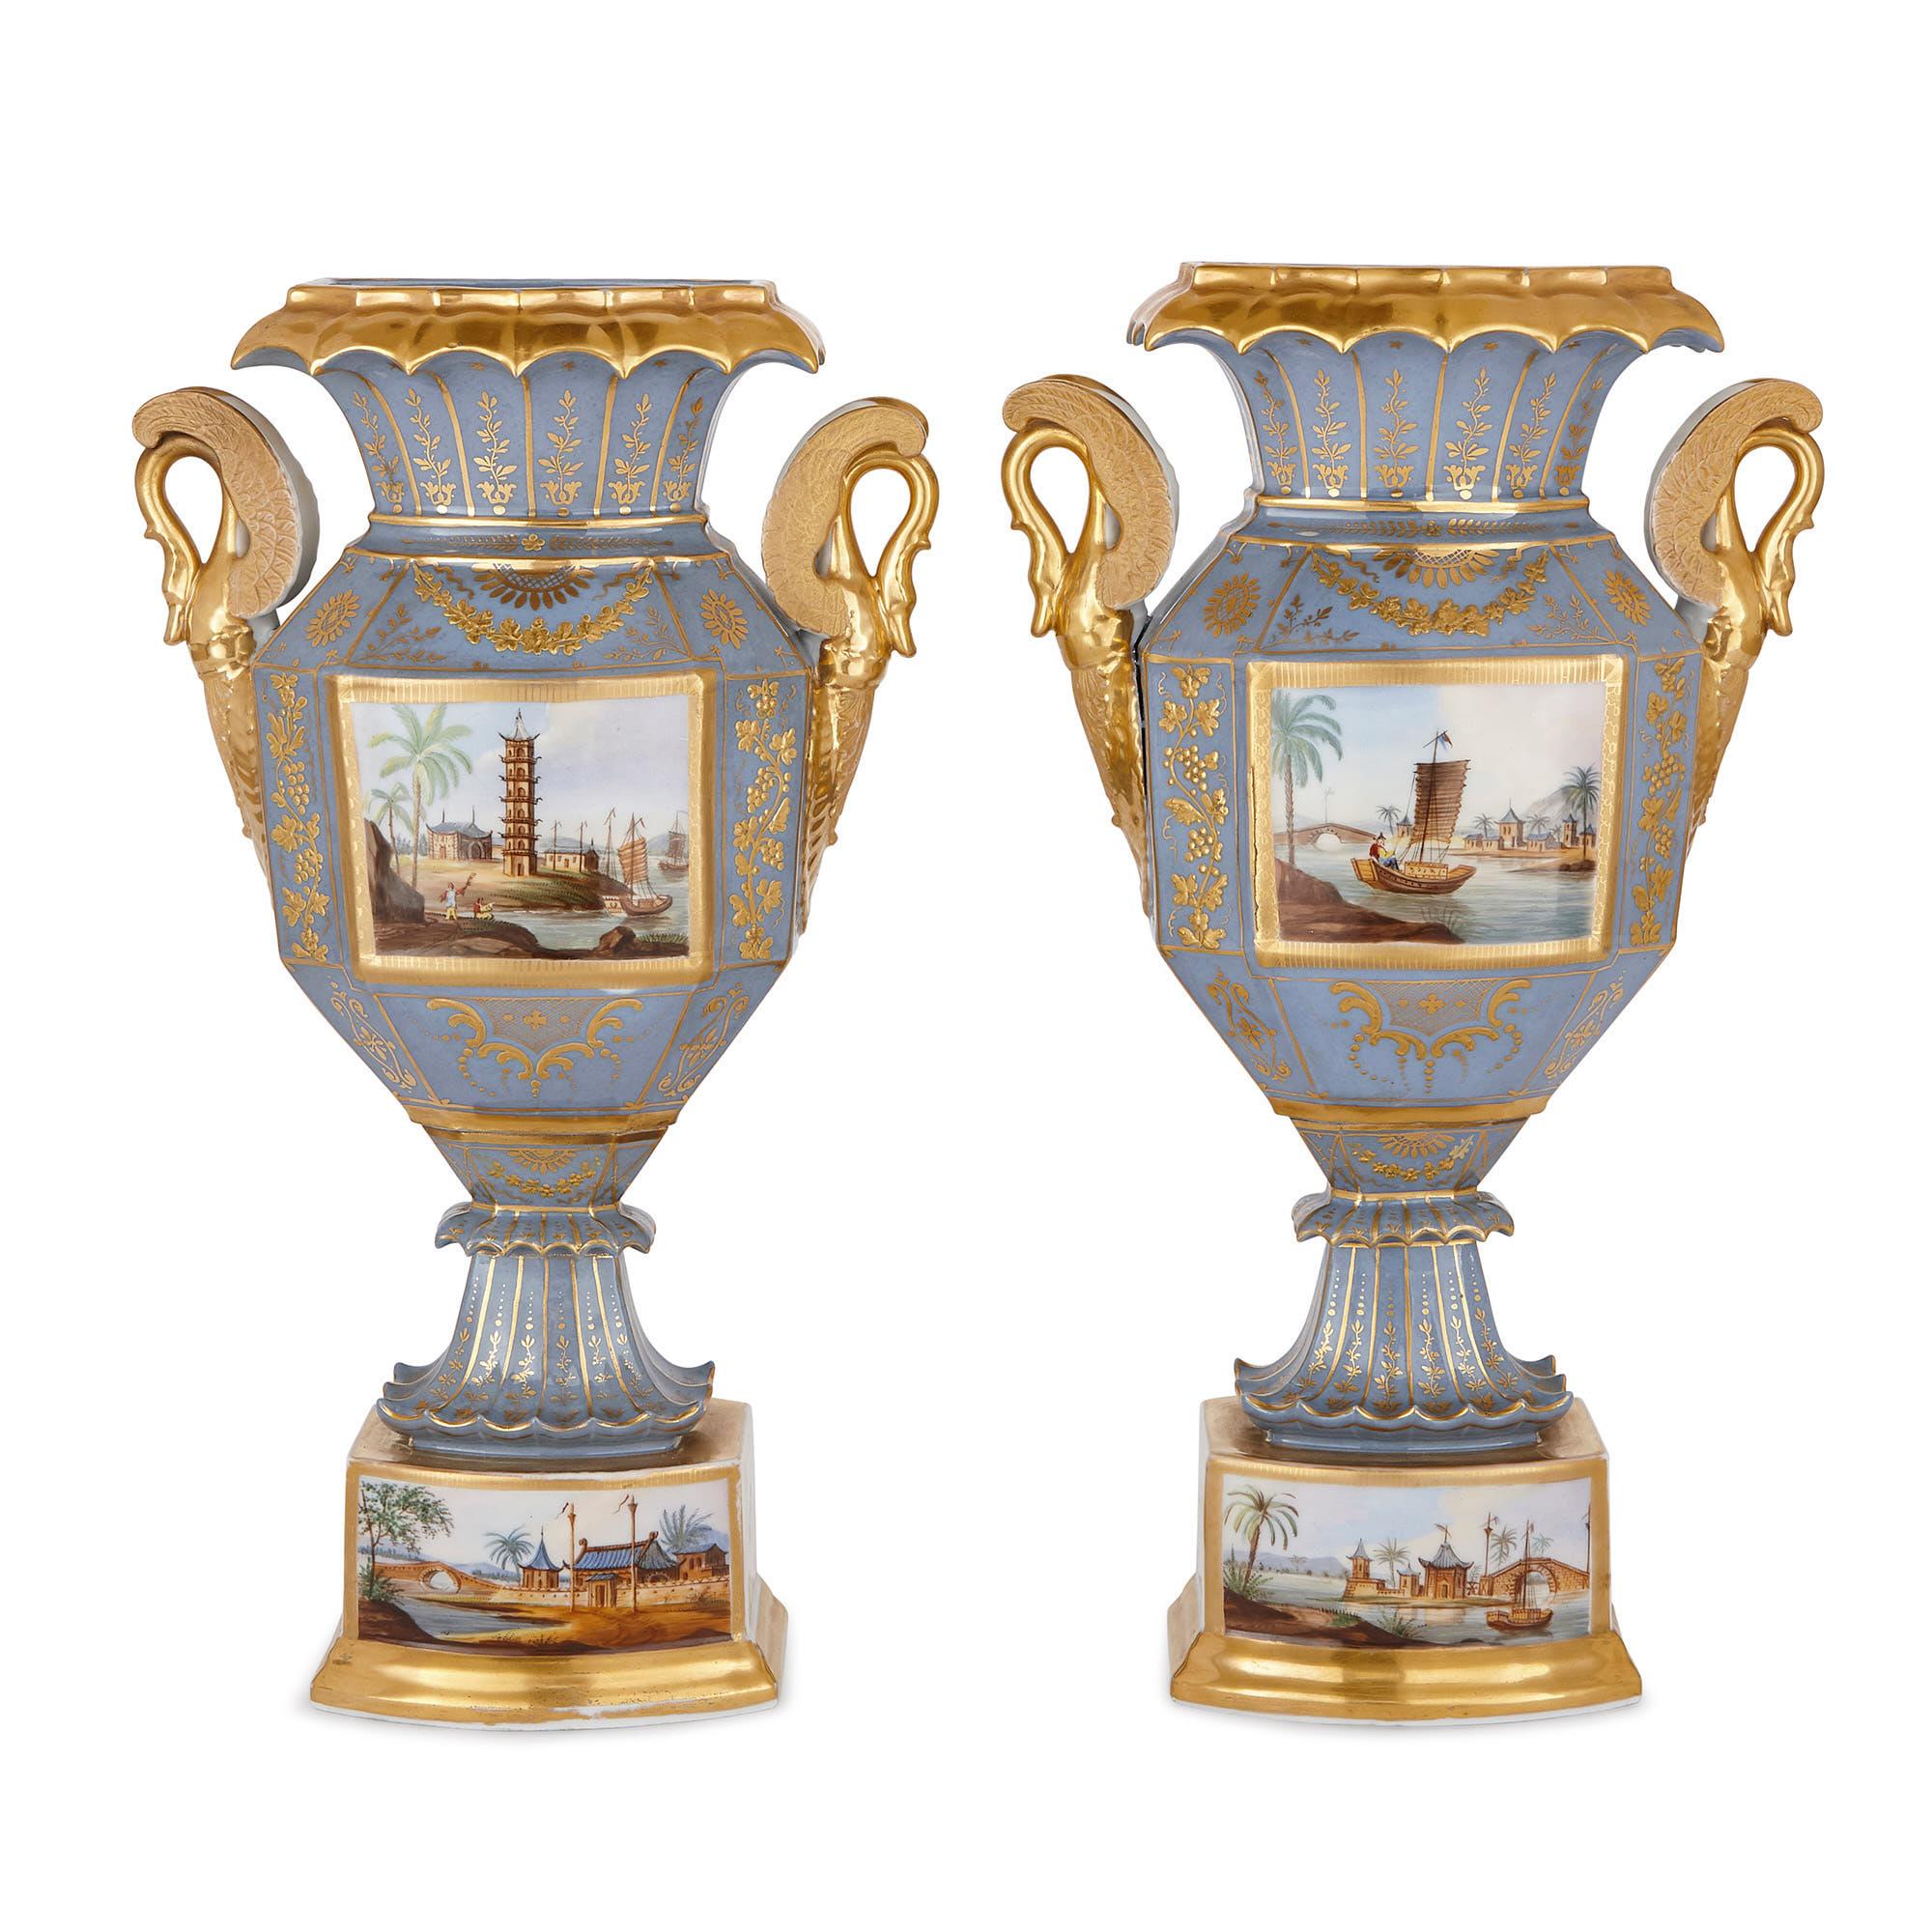 These wonderful porcelain vases were crafted in France in circa 1850. They have been designed in a fanciful East Asian style, known as Chinoiserie, from the French word for Chinese, ‘chinois’. This ornamental style was very popular in Europe in the